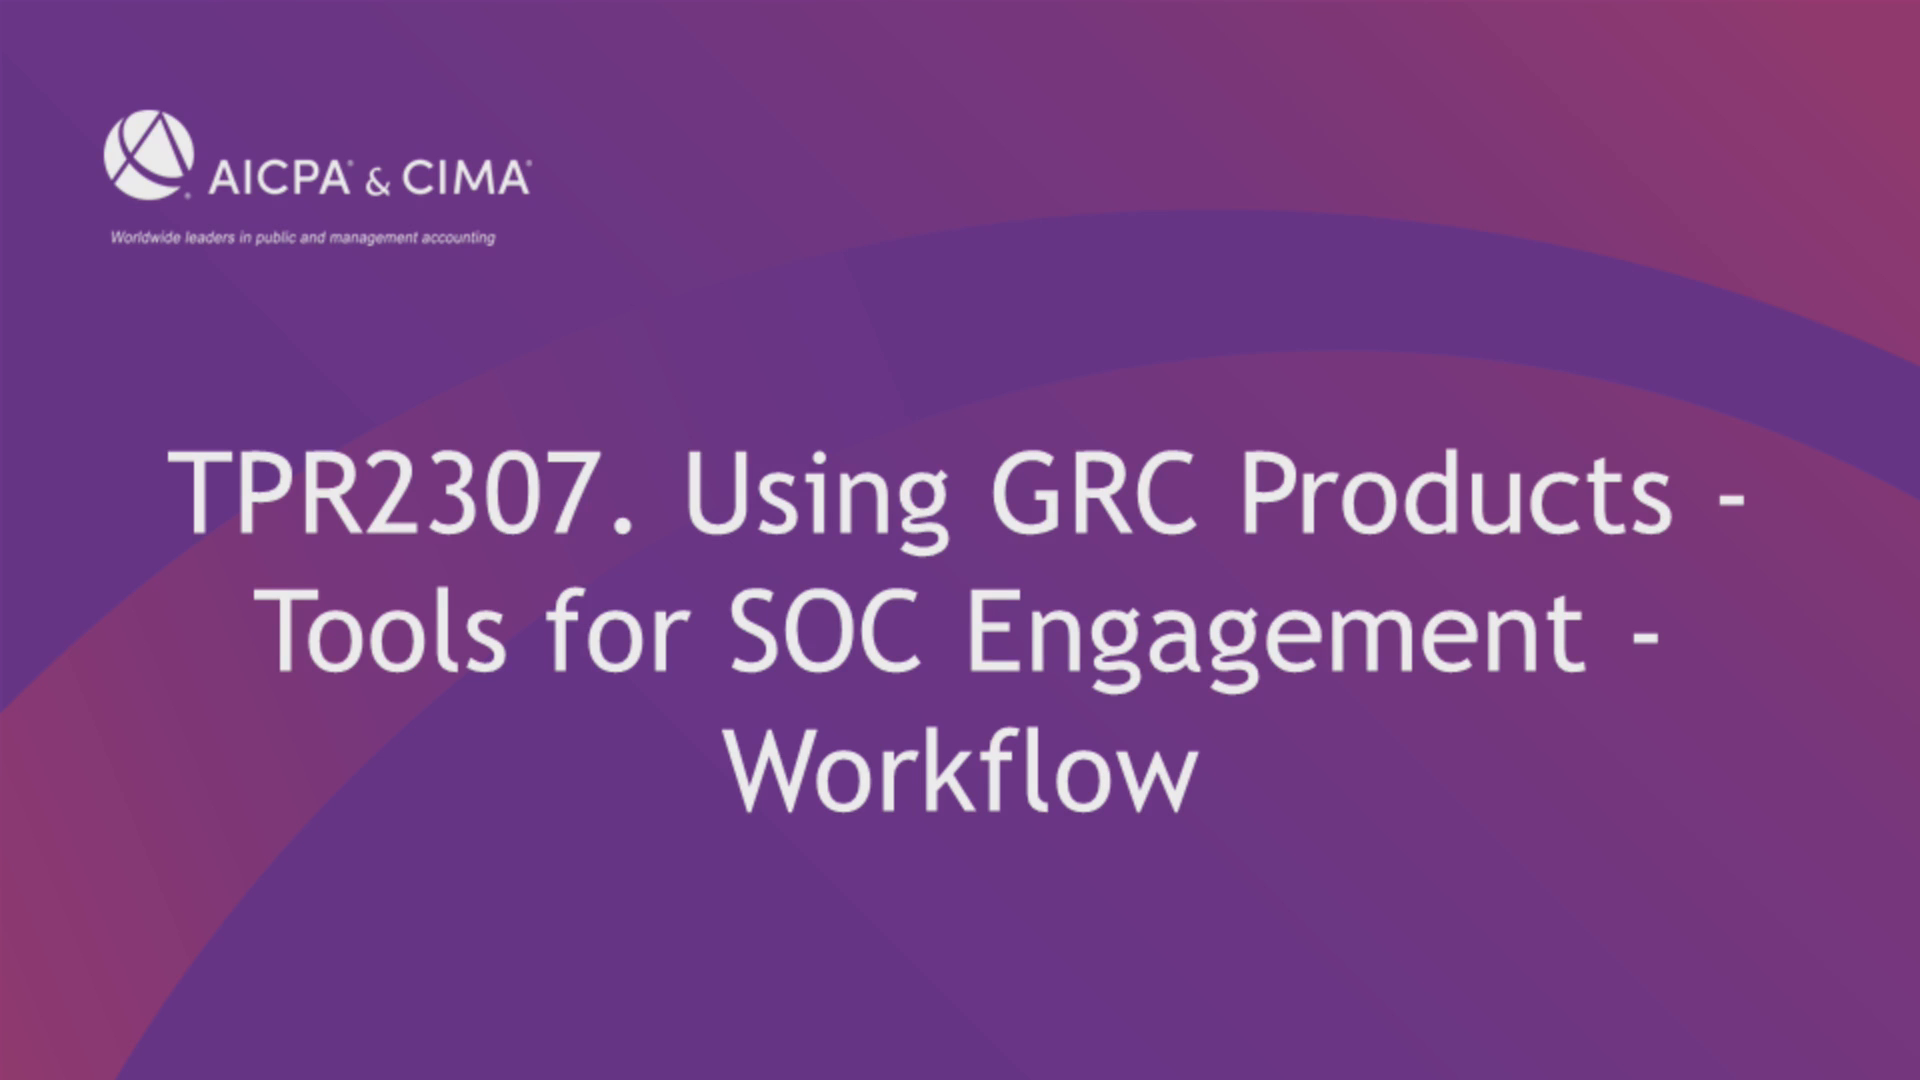 Using GRC Products - Tools for SOC Engagement - Workflow and Day Close